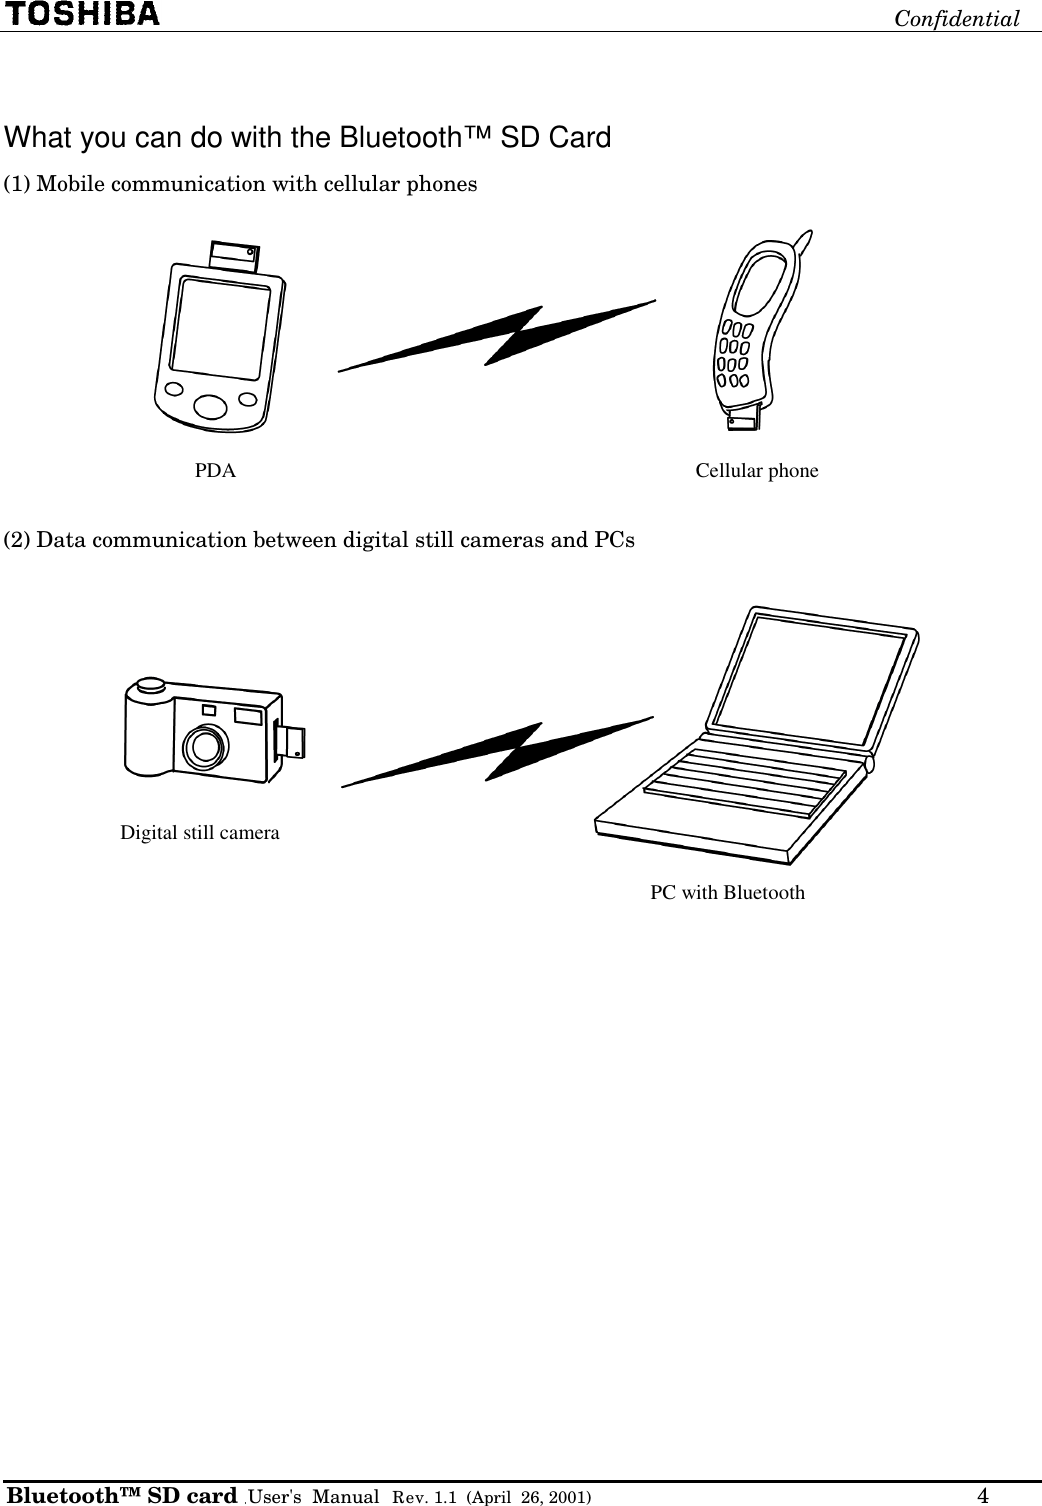 ConfidentialBluetooth™ SD card User&apos;s  Manual   Rev. 1.1  (April  26, 2001)                                      4What you can do with the Bluetooth™ SD Card(1) Mobile communication with cellular phonesPDA Cellular phone(2) Data communication between digital still cameras and PCsDigital still camera PC with Bluetooth